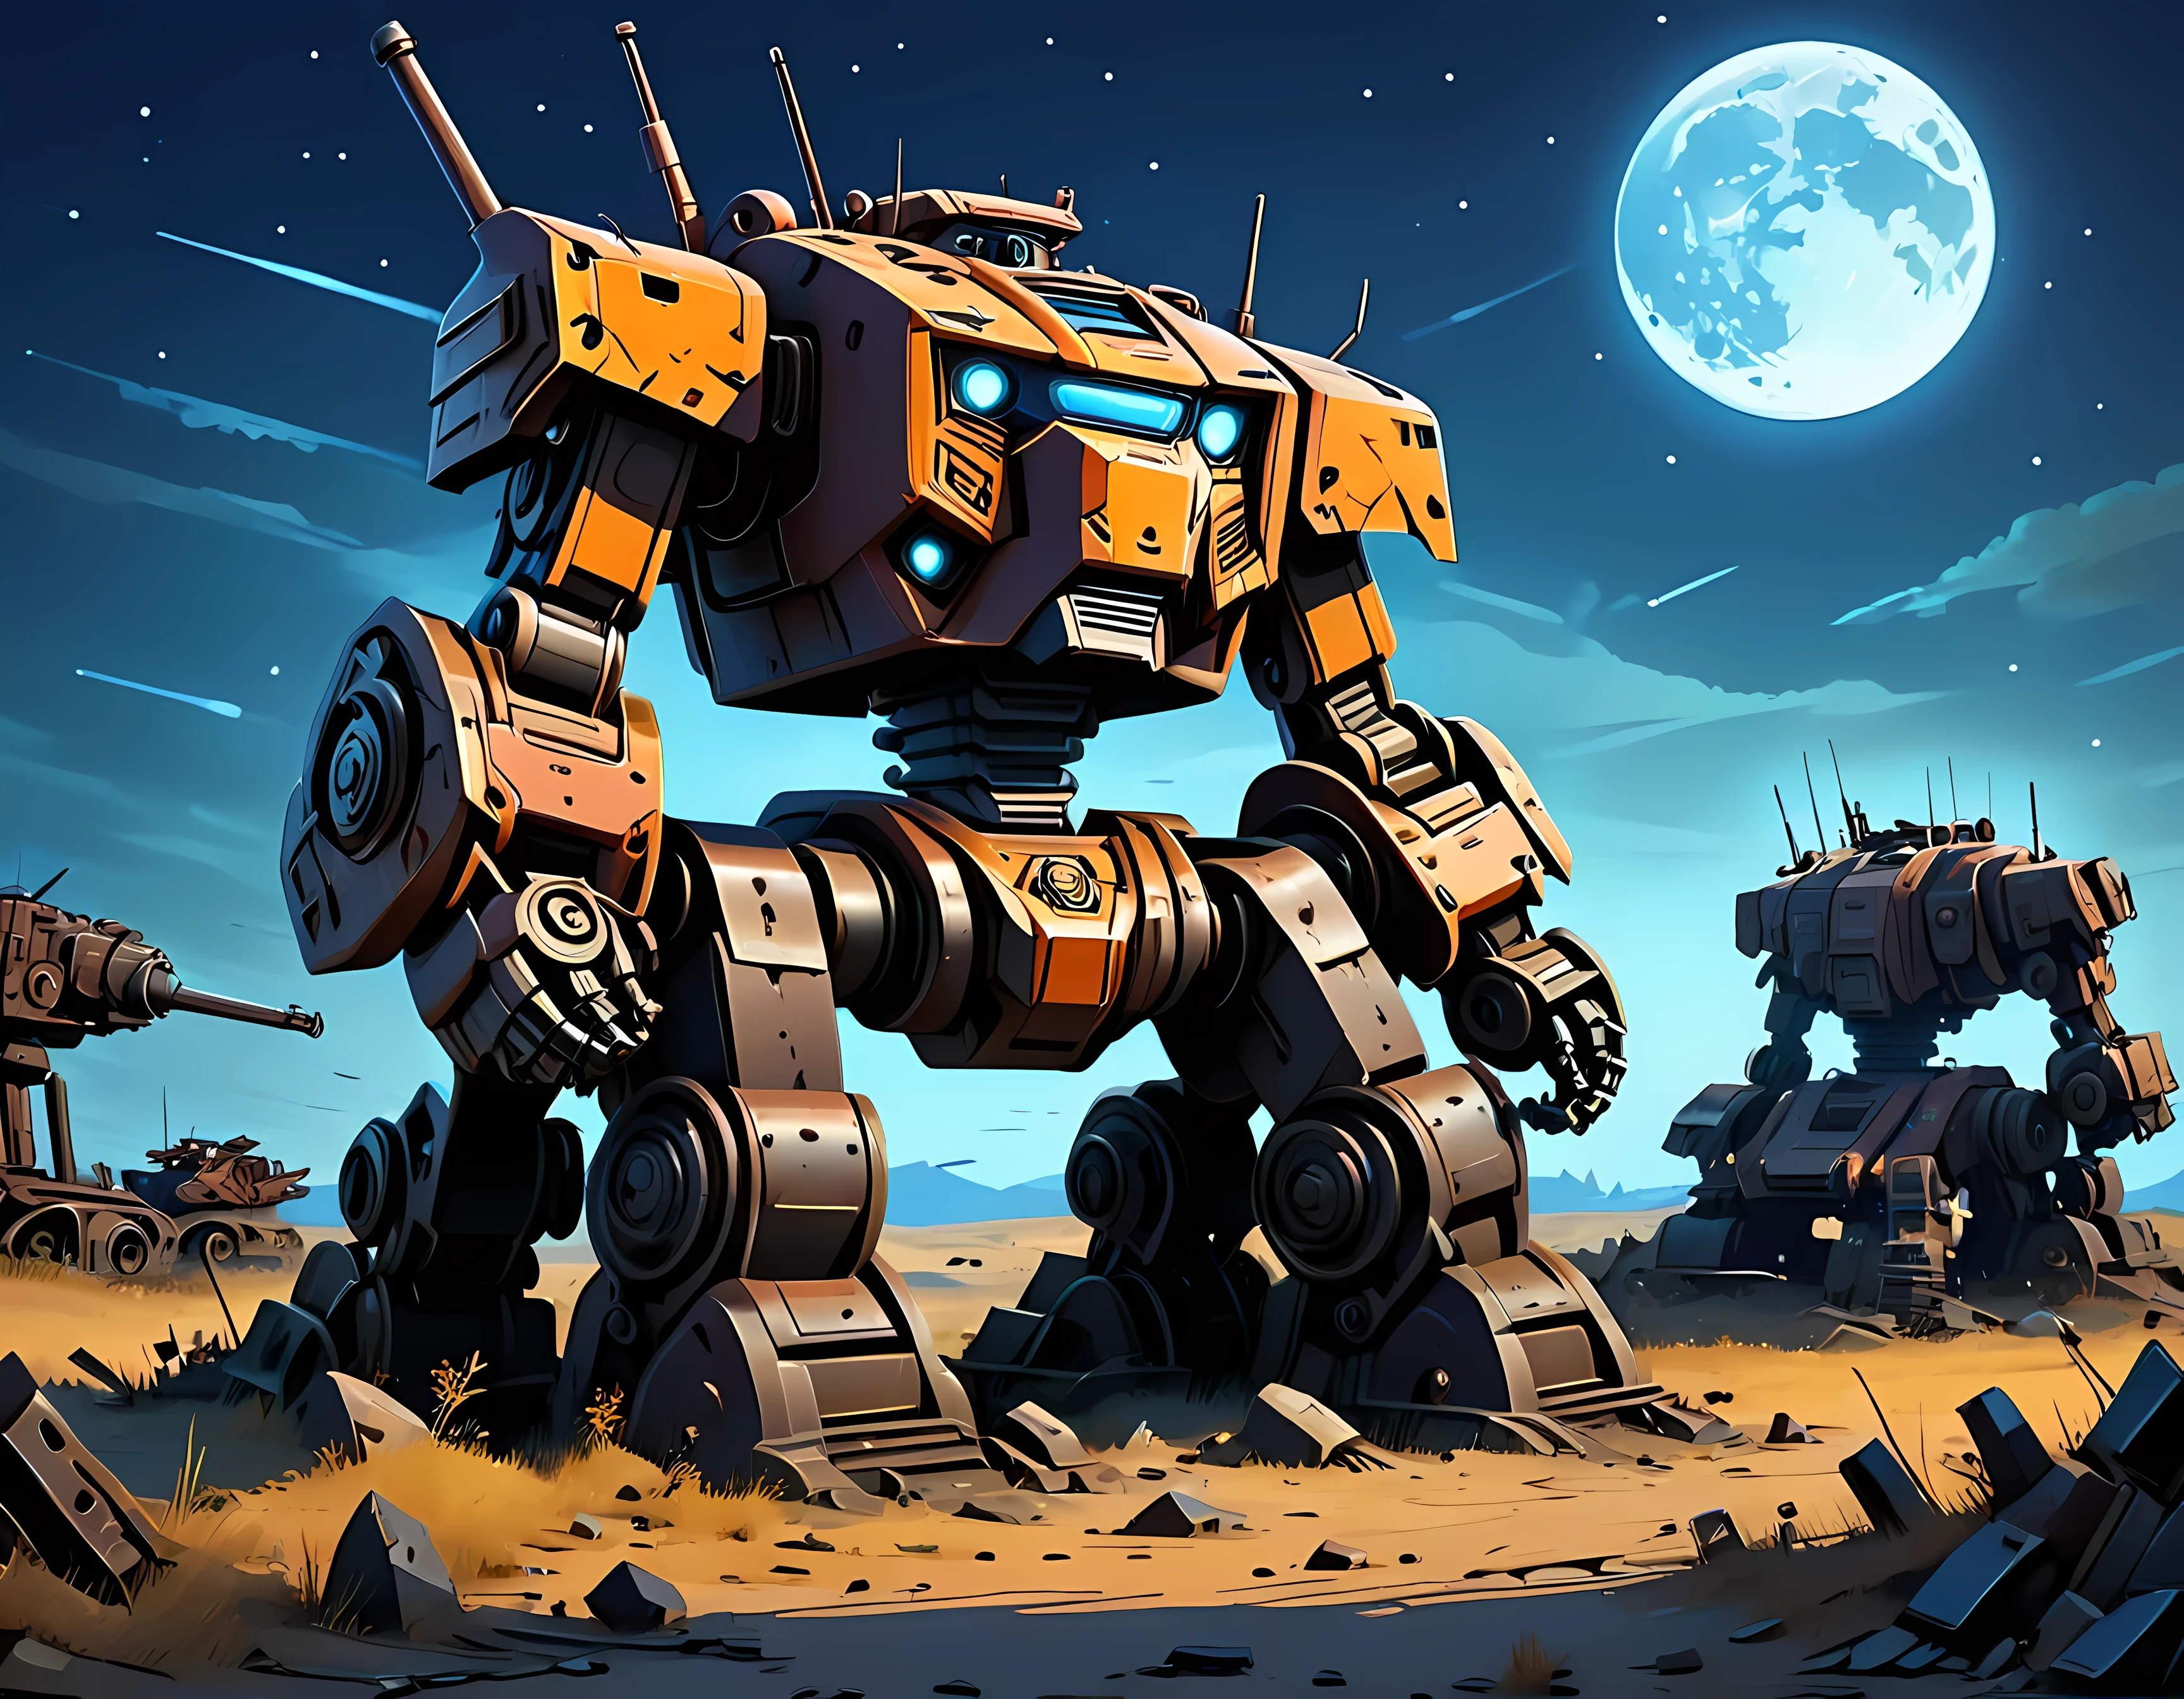 Pixel art, a vast mech graveyard under a starry moonlit sky, abandoned war machines lie in disrepair, battered and rusted, rows of broken mechs, nature intermingling with metal, a sense of melancholy and nostalgia, masterpiece in maximum 16K resolution, superb quality. | ((More_Detail))